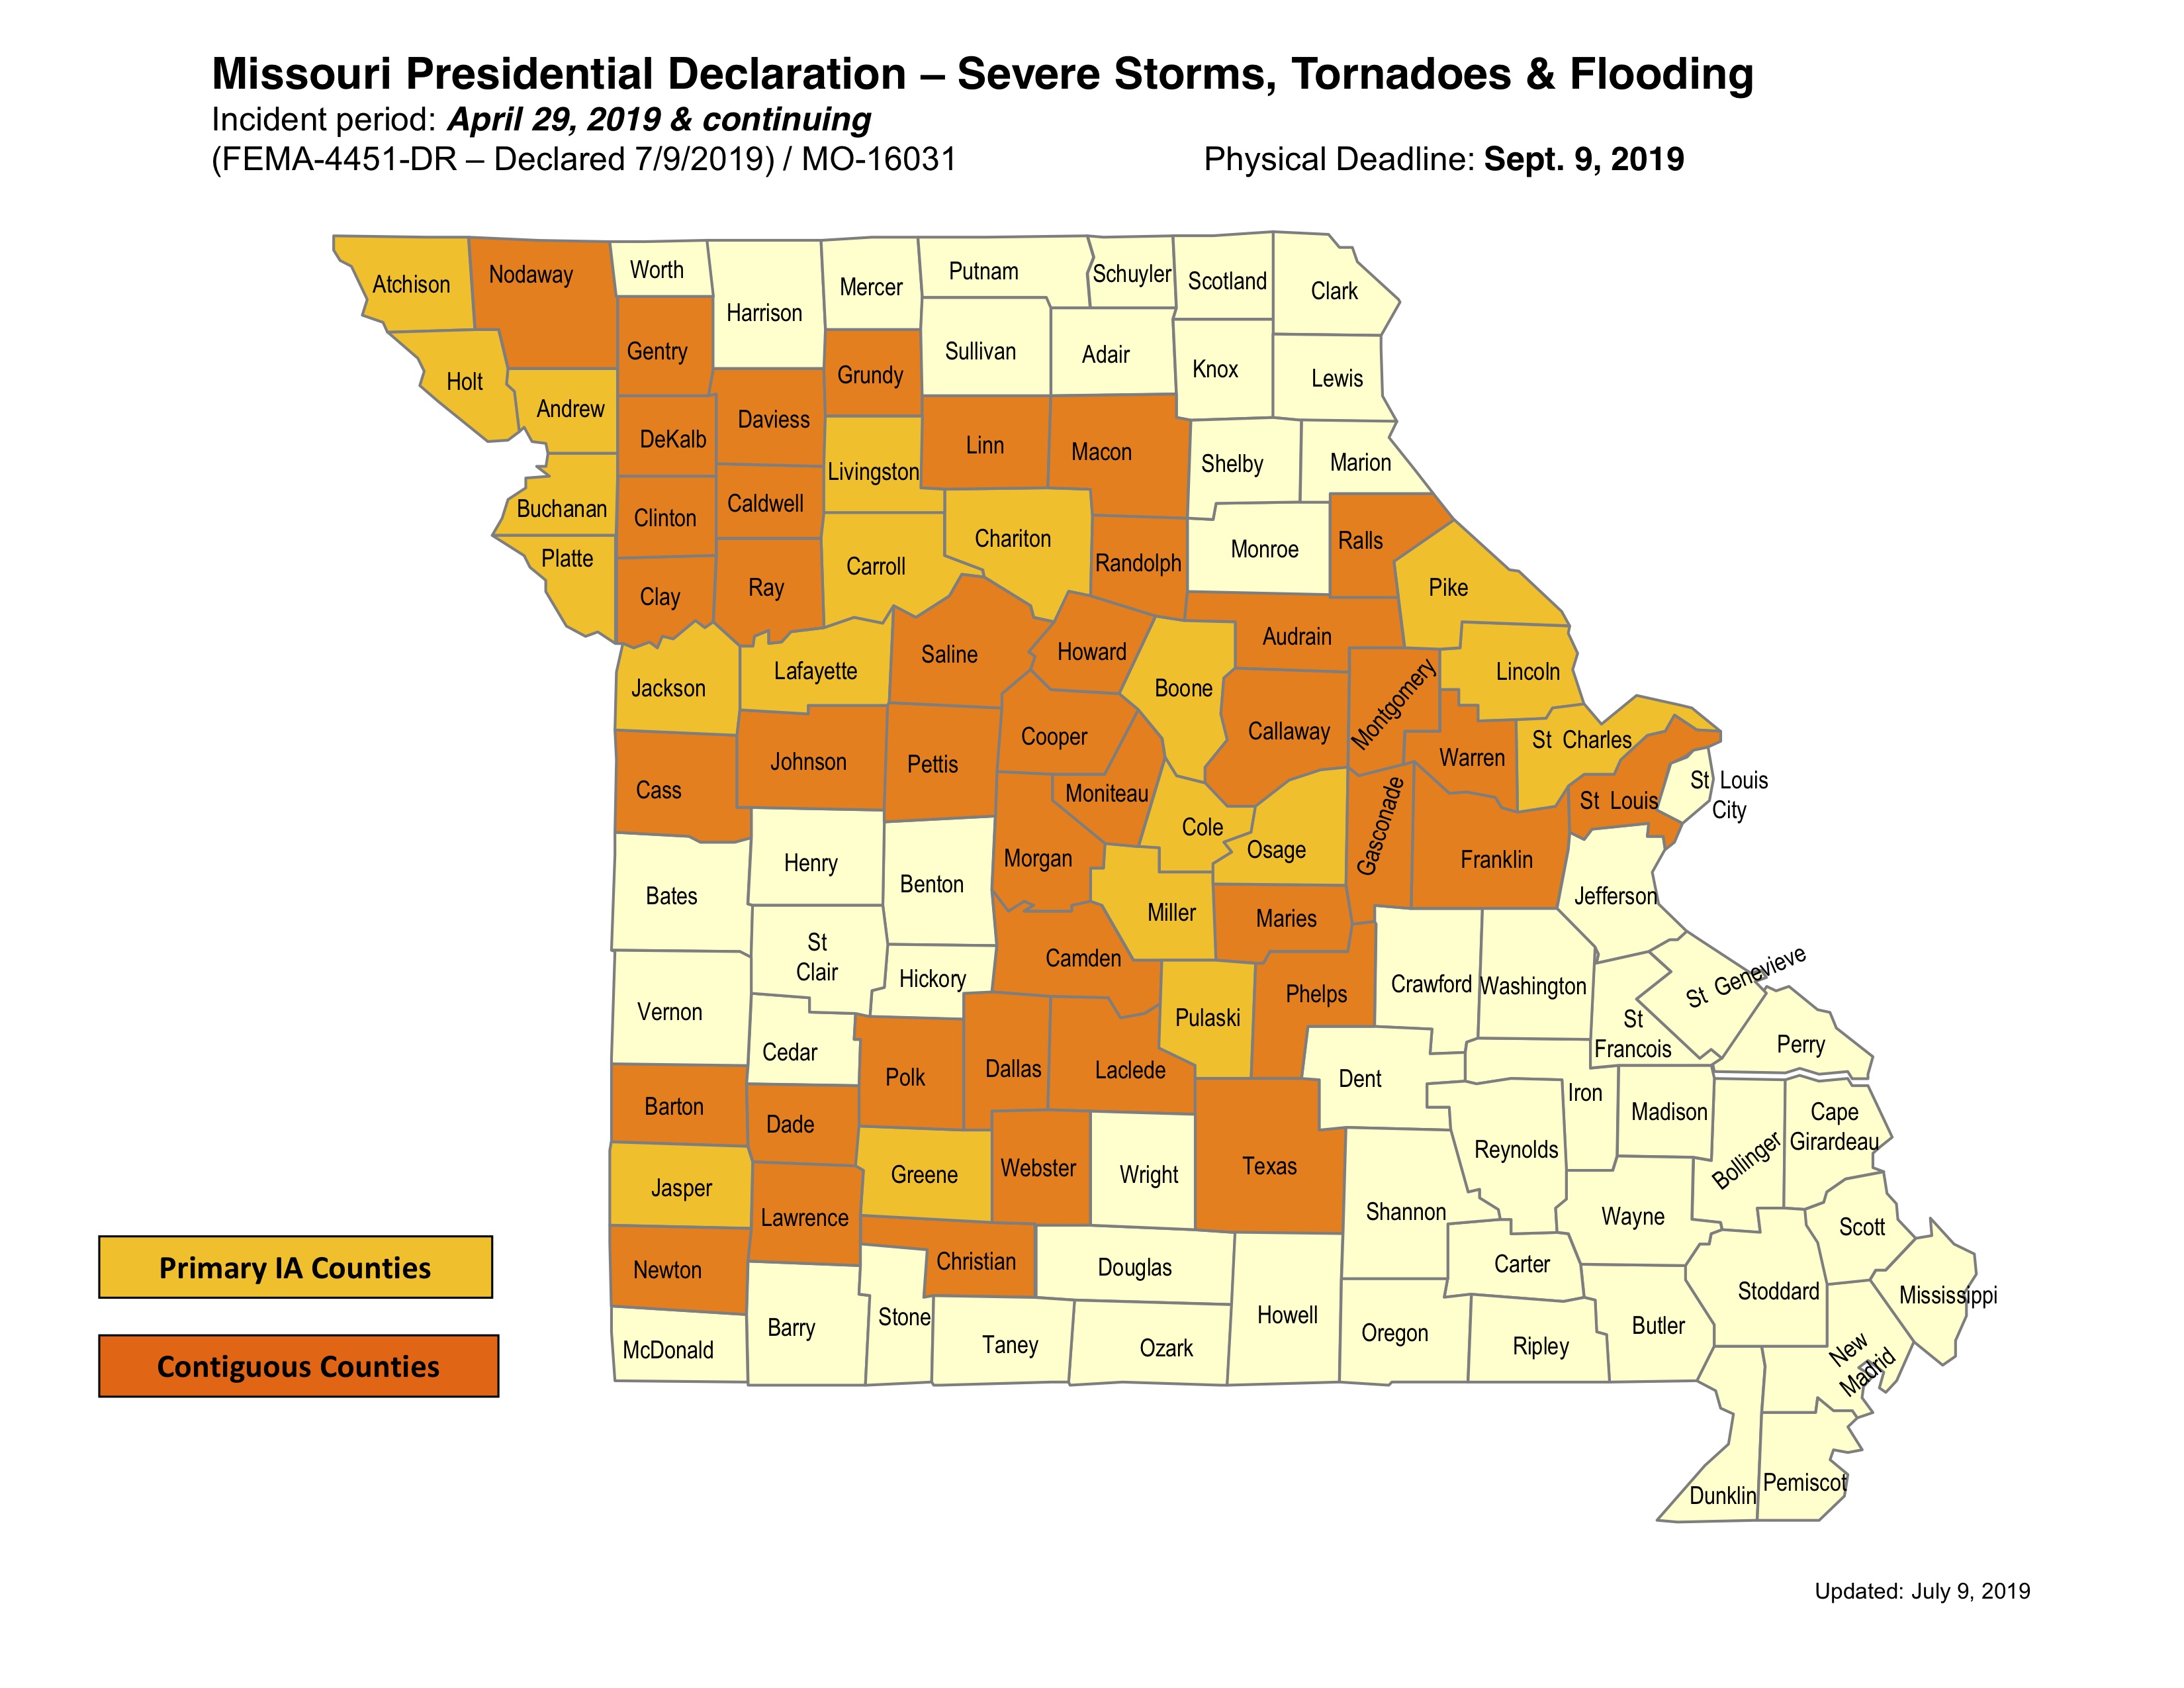 MO16031 2019 footprint map_Severe Storms, Tornadoes and Flooding